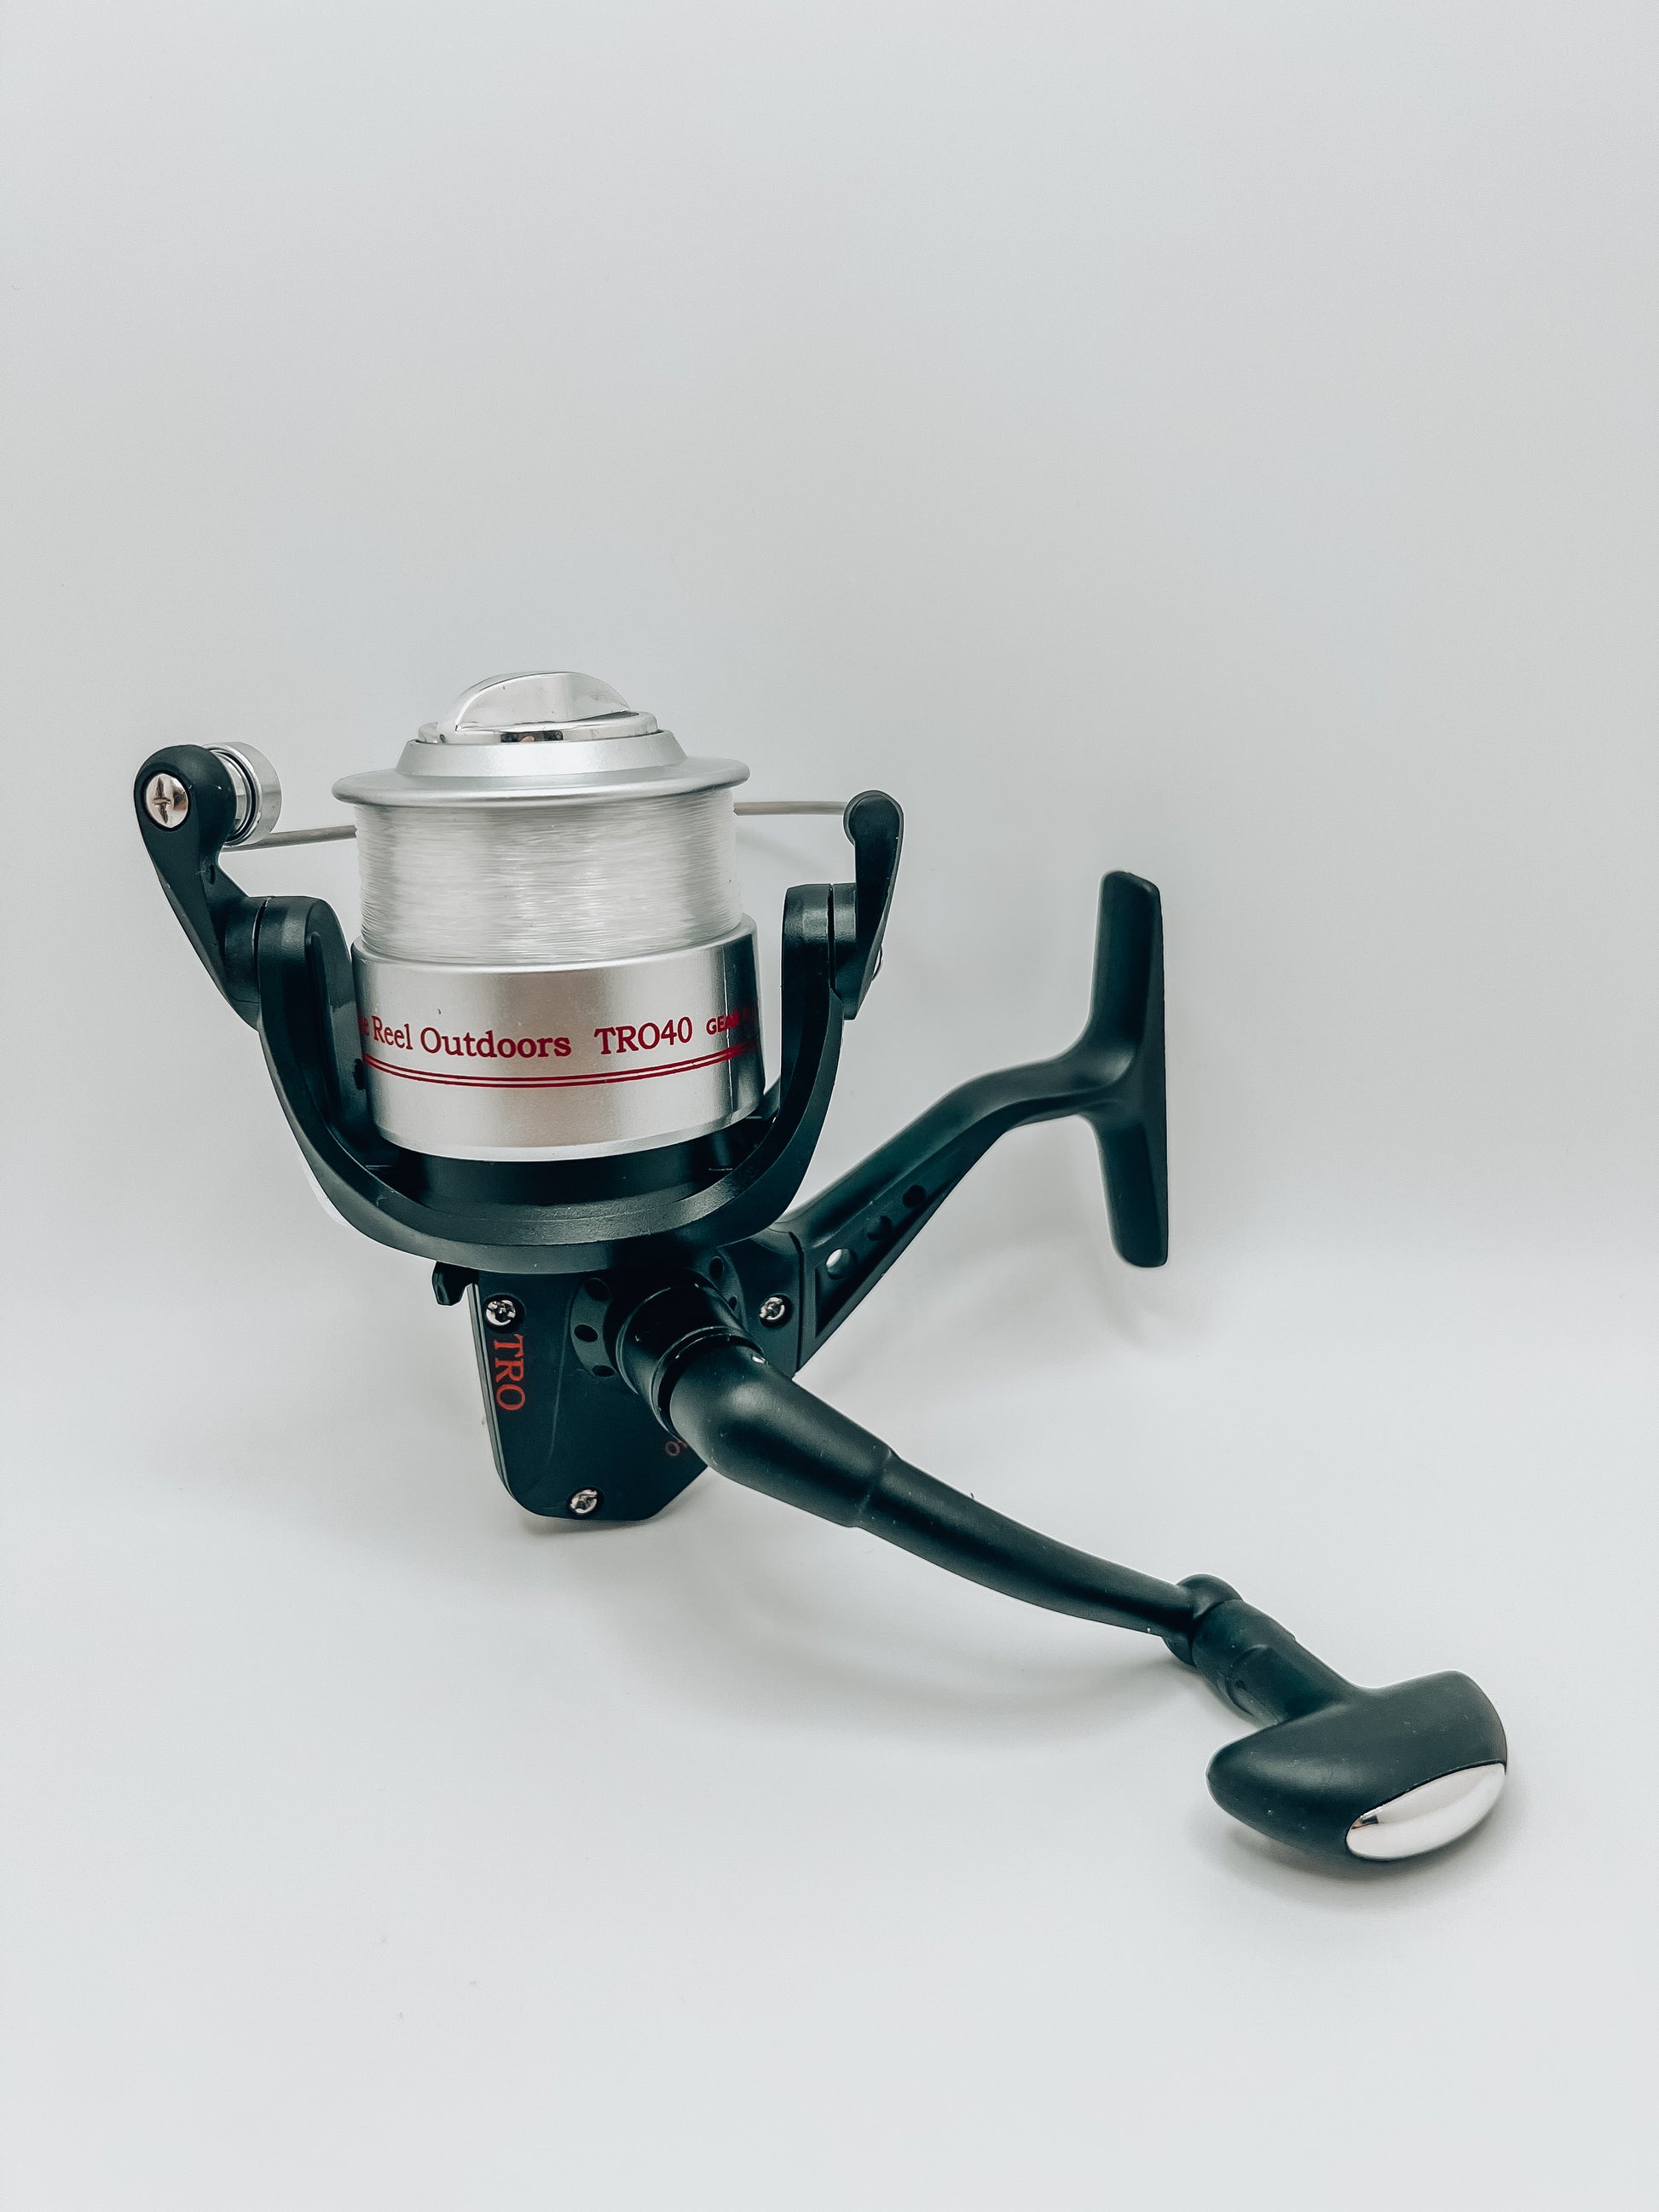 TRO 40 Spinning Reel – The Reel Outdoors Inc.